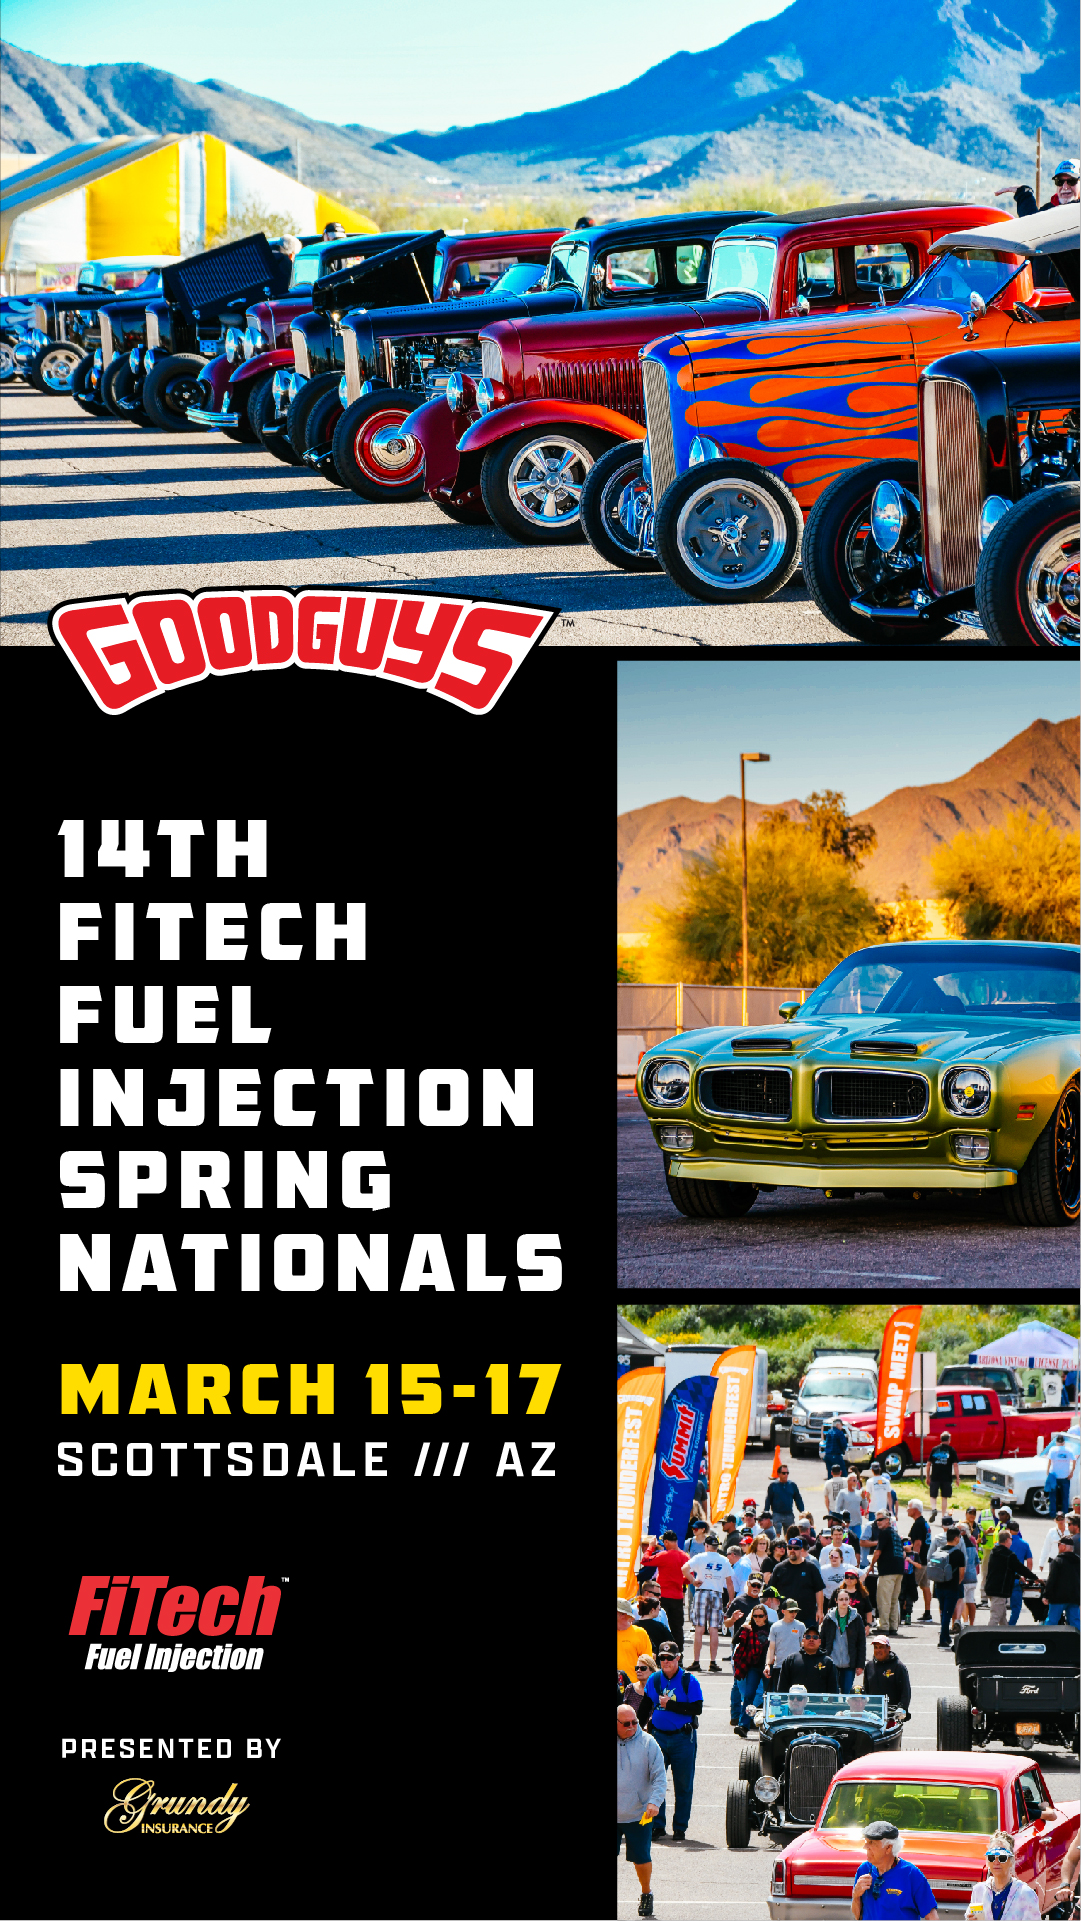 Goodguys 13th FiTech Fuel Injection Spring Nationals presented by Grundy Insurance | March 17-19, 2023 | WestWorld of Scottsdale